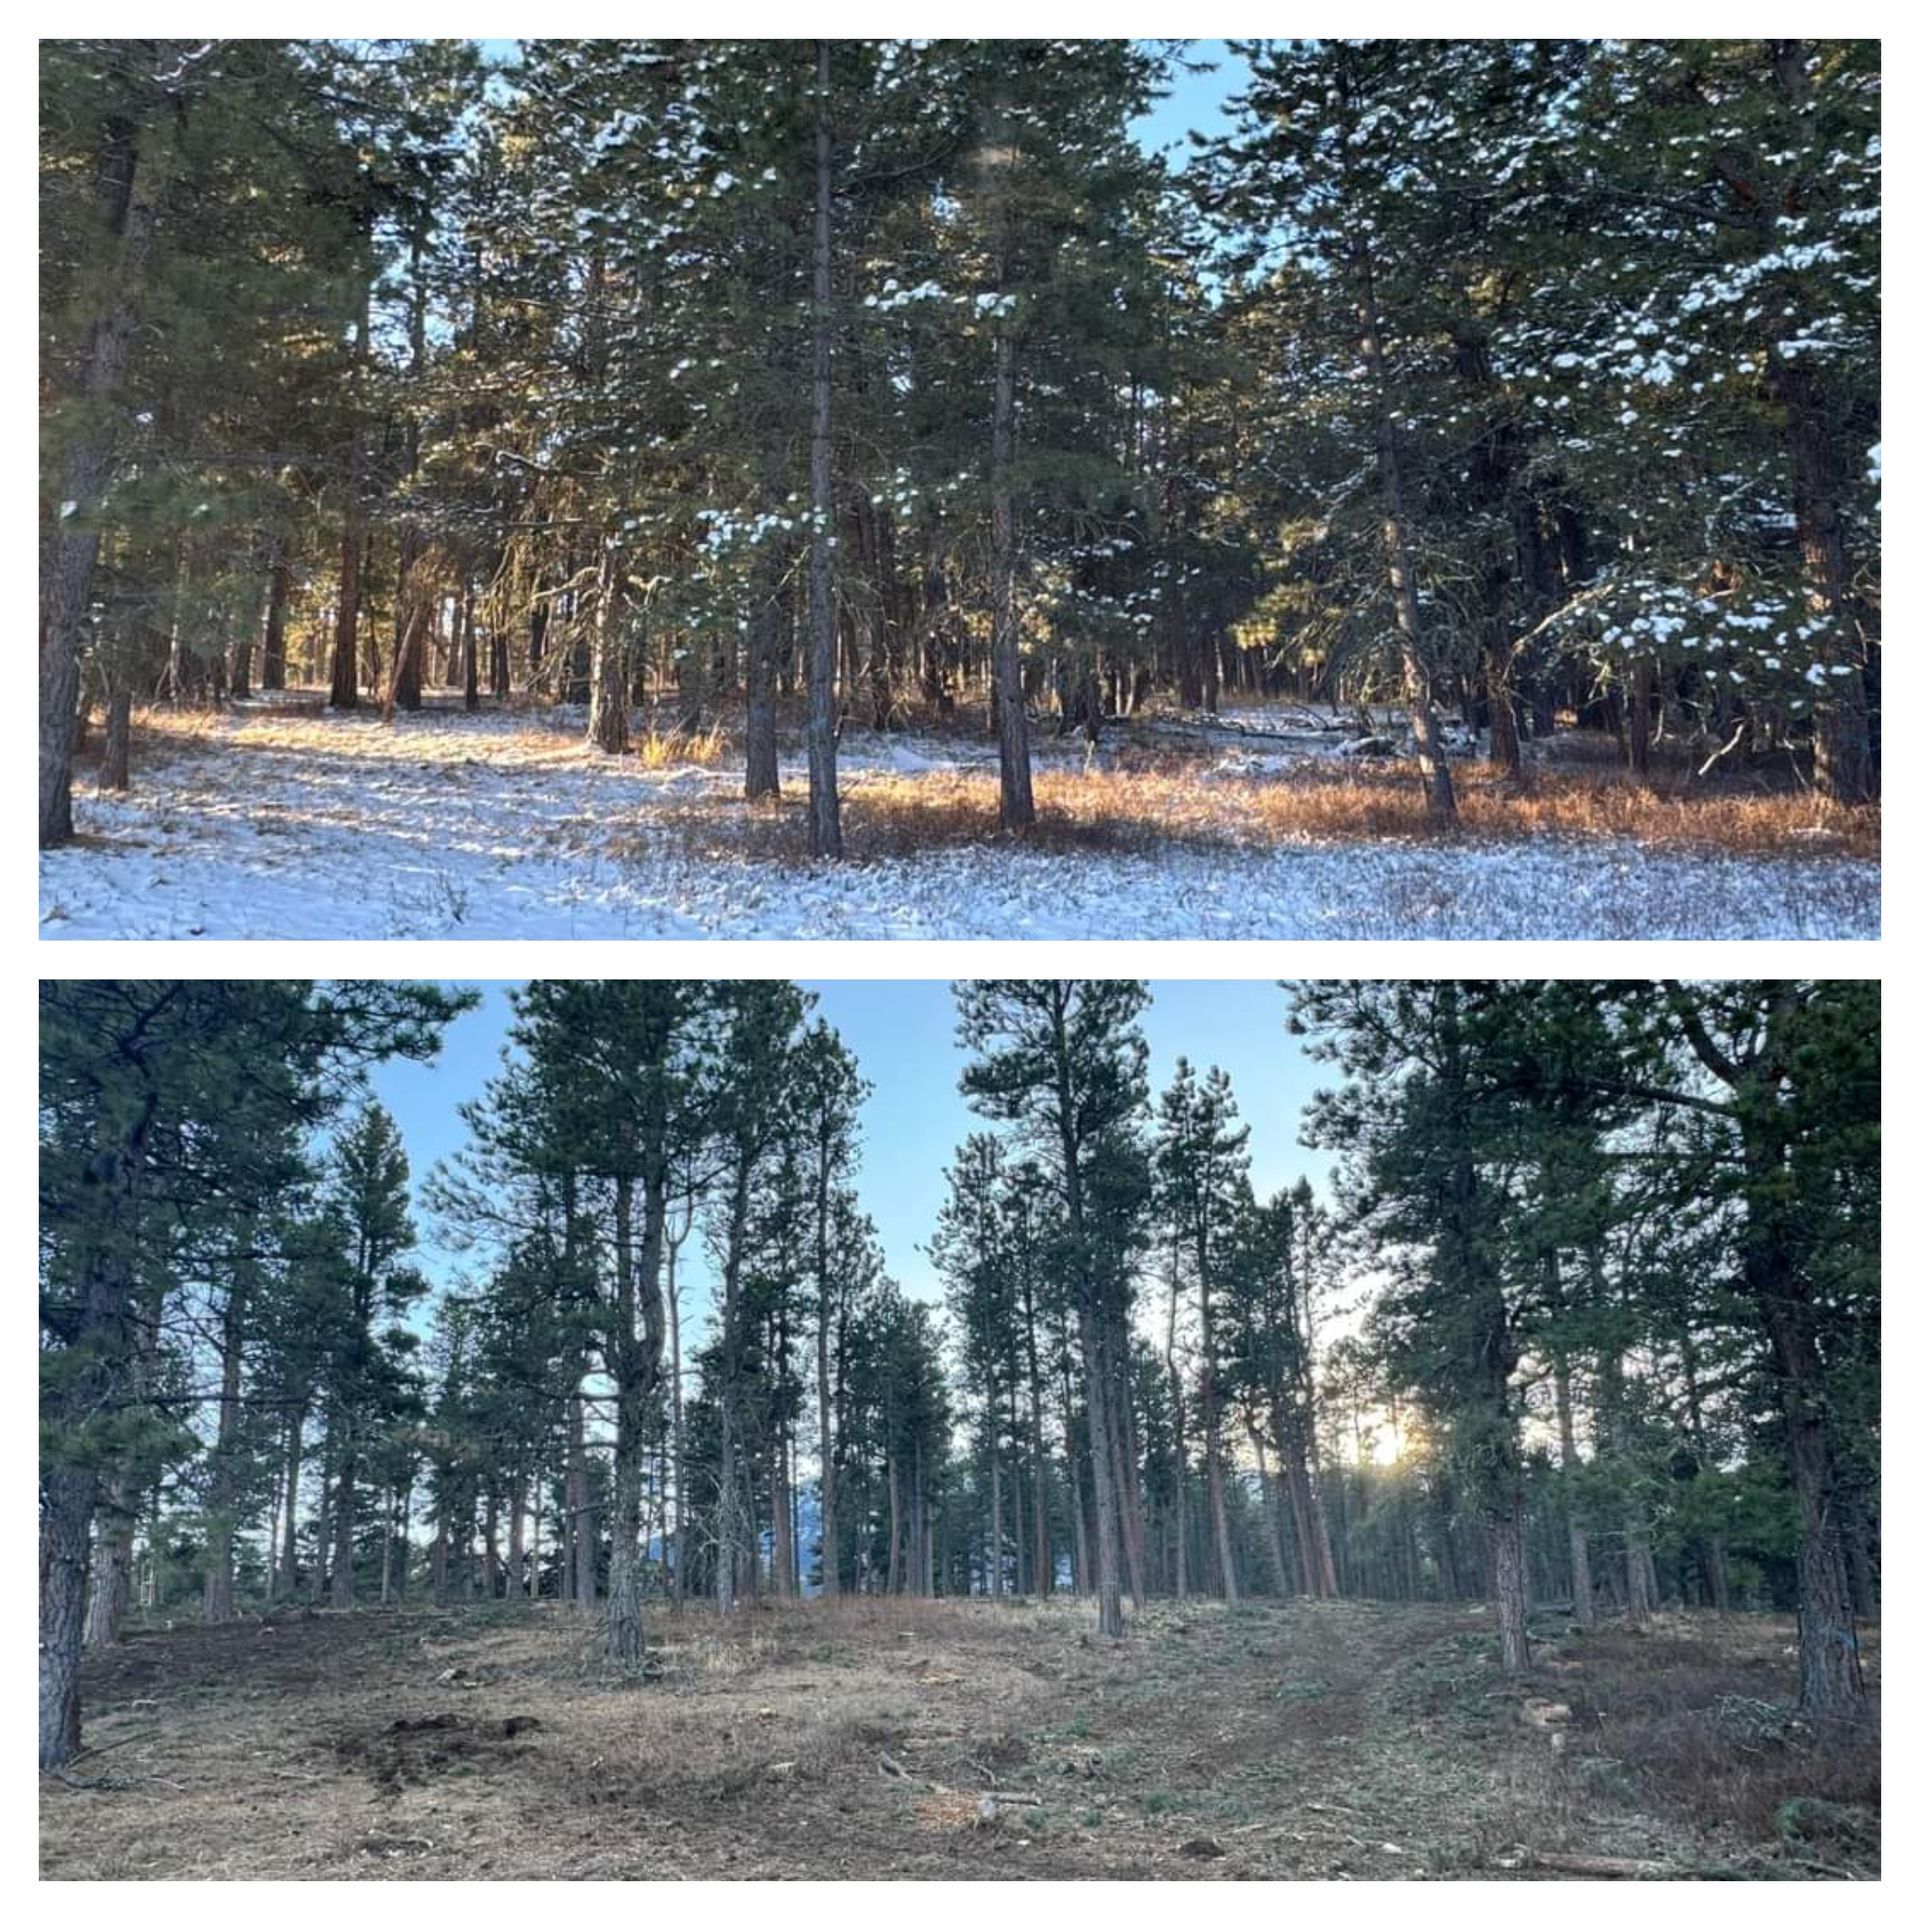 Forest With Snow On The Ground - Billings, MT - Forest and Range Solutions